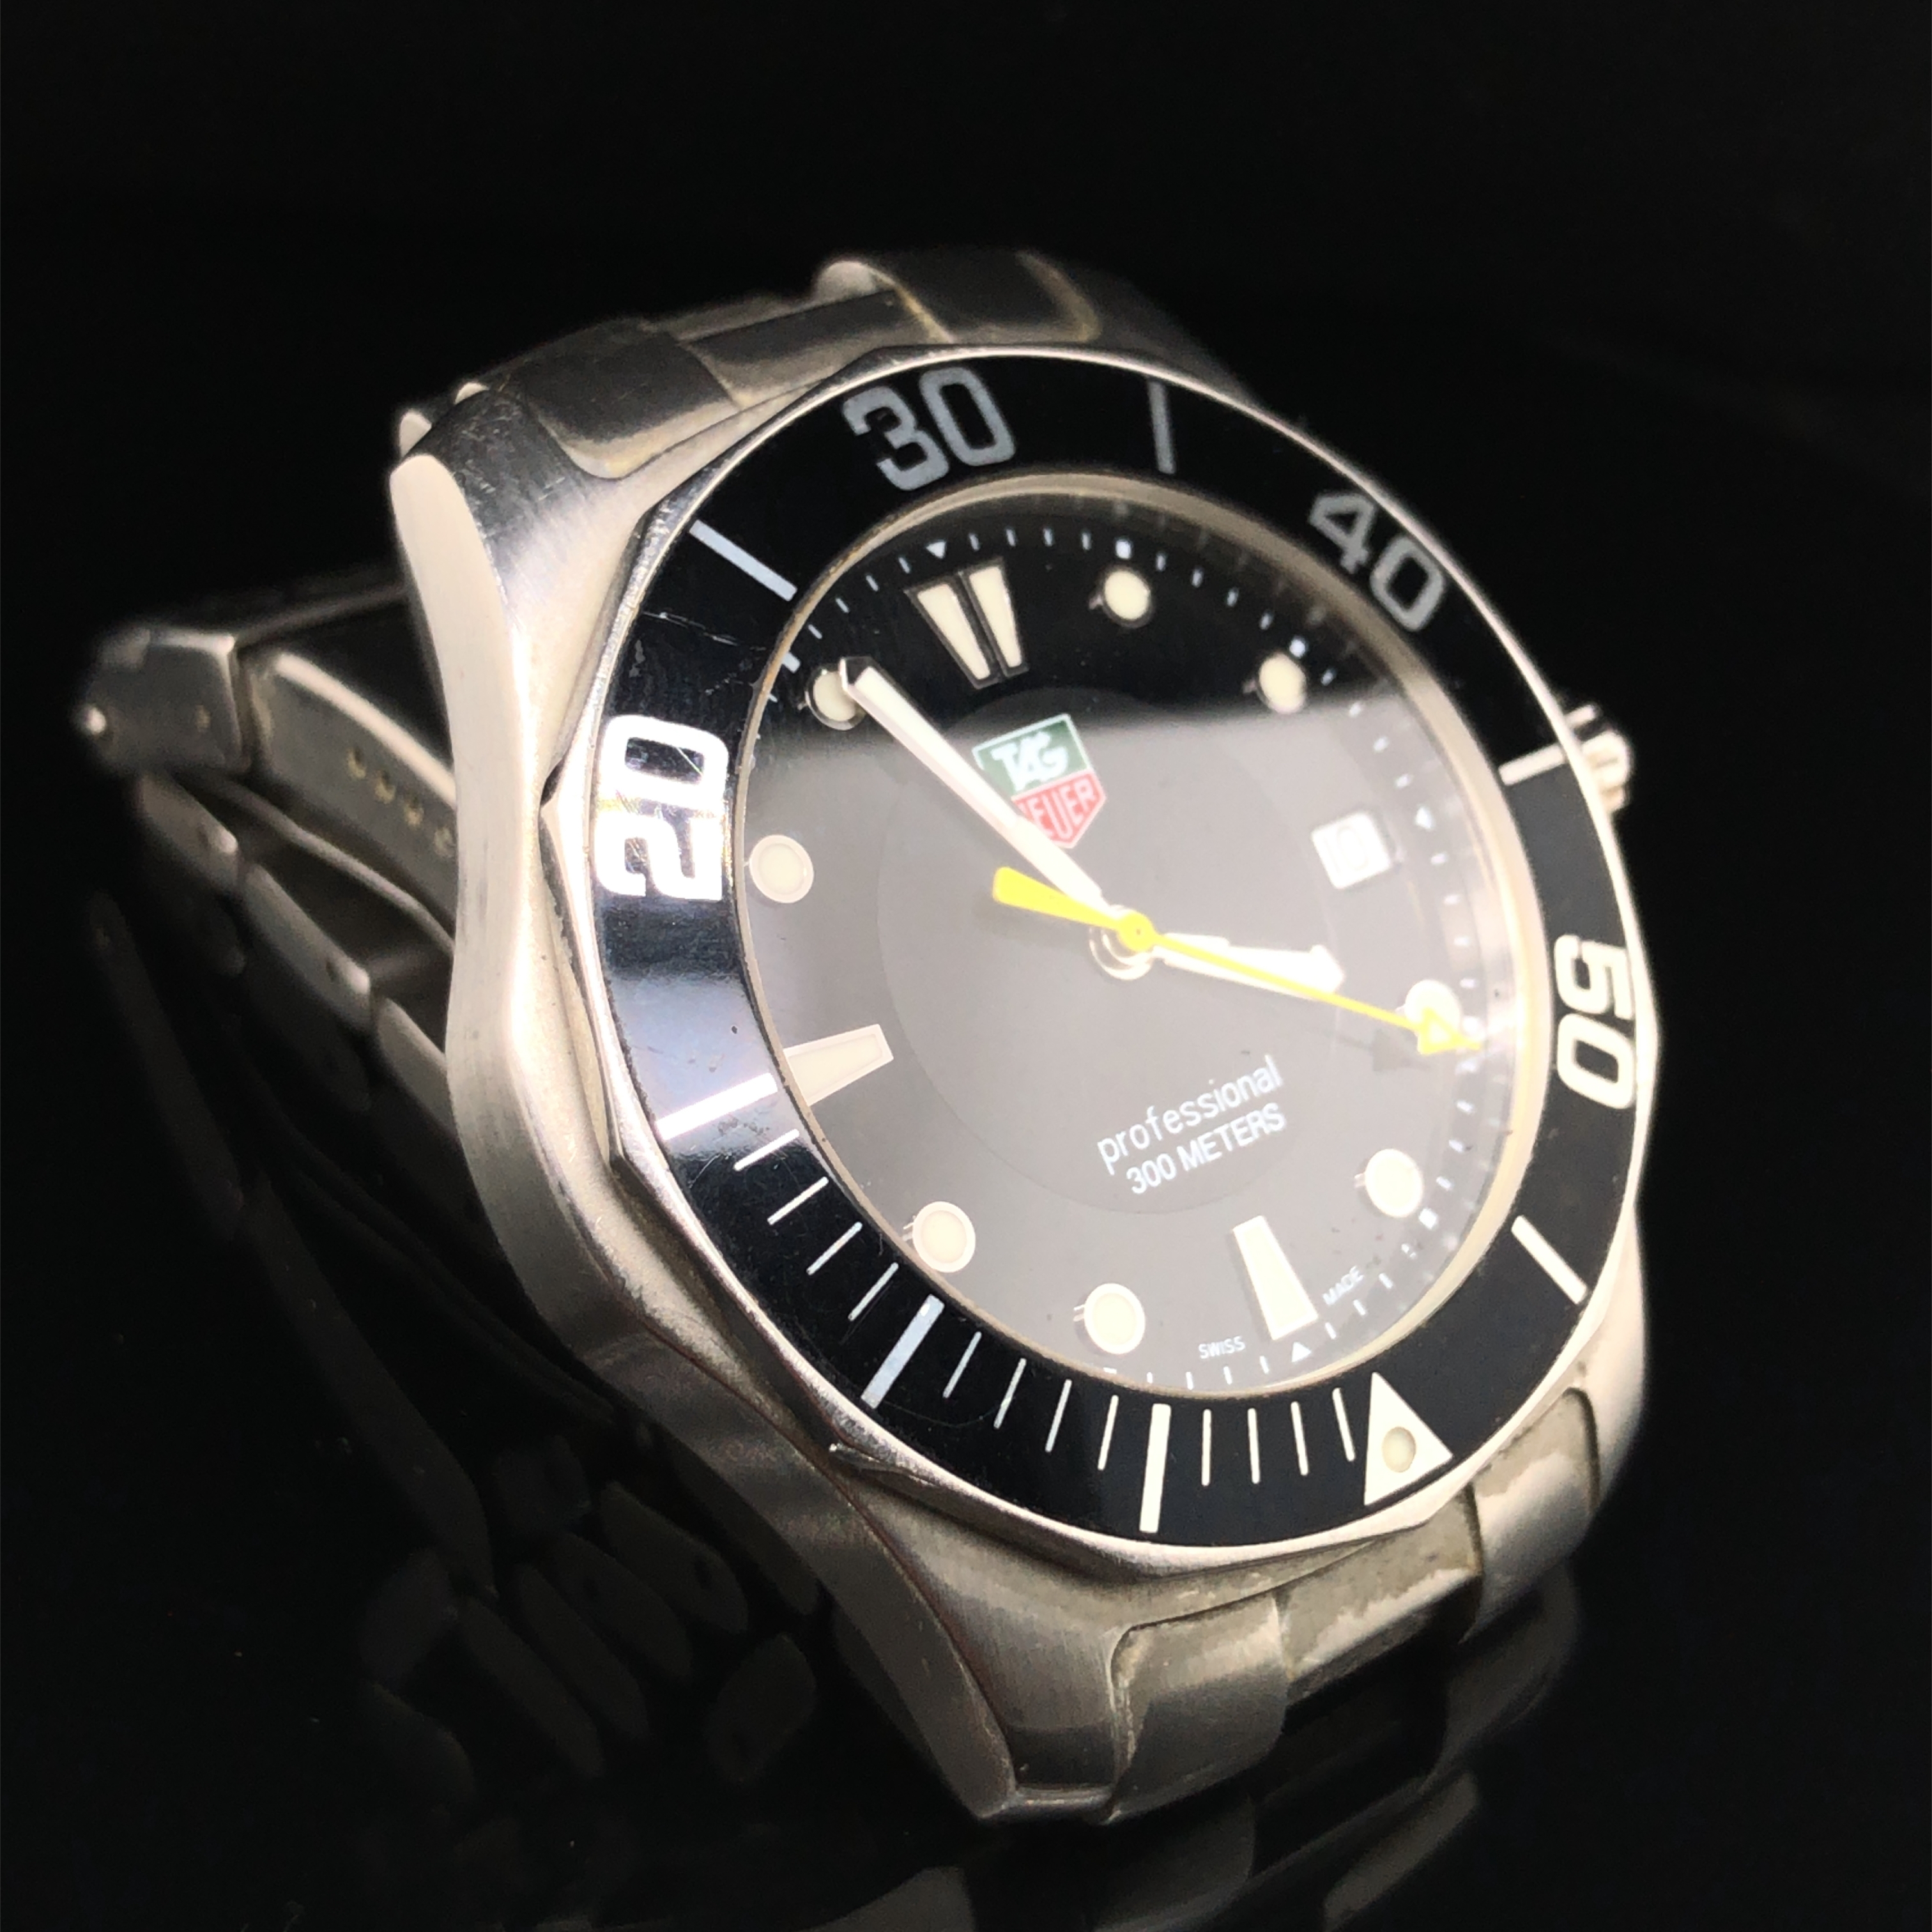 A TAG HEUER PROFESSIONAL QUARTZ STAINLESS STEEL GENTS WATCH, REF WAB1110. - Image 4 of 4